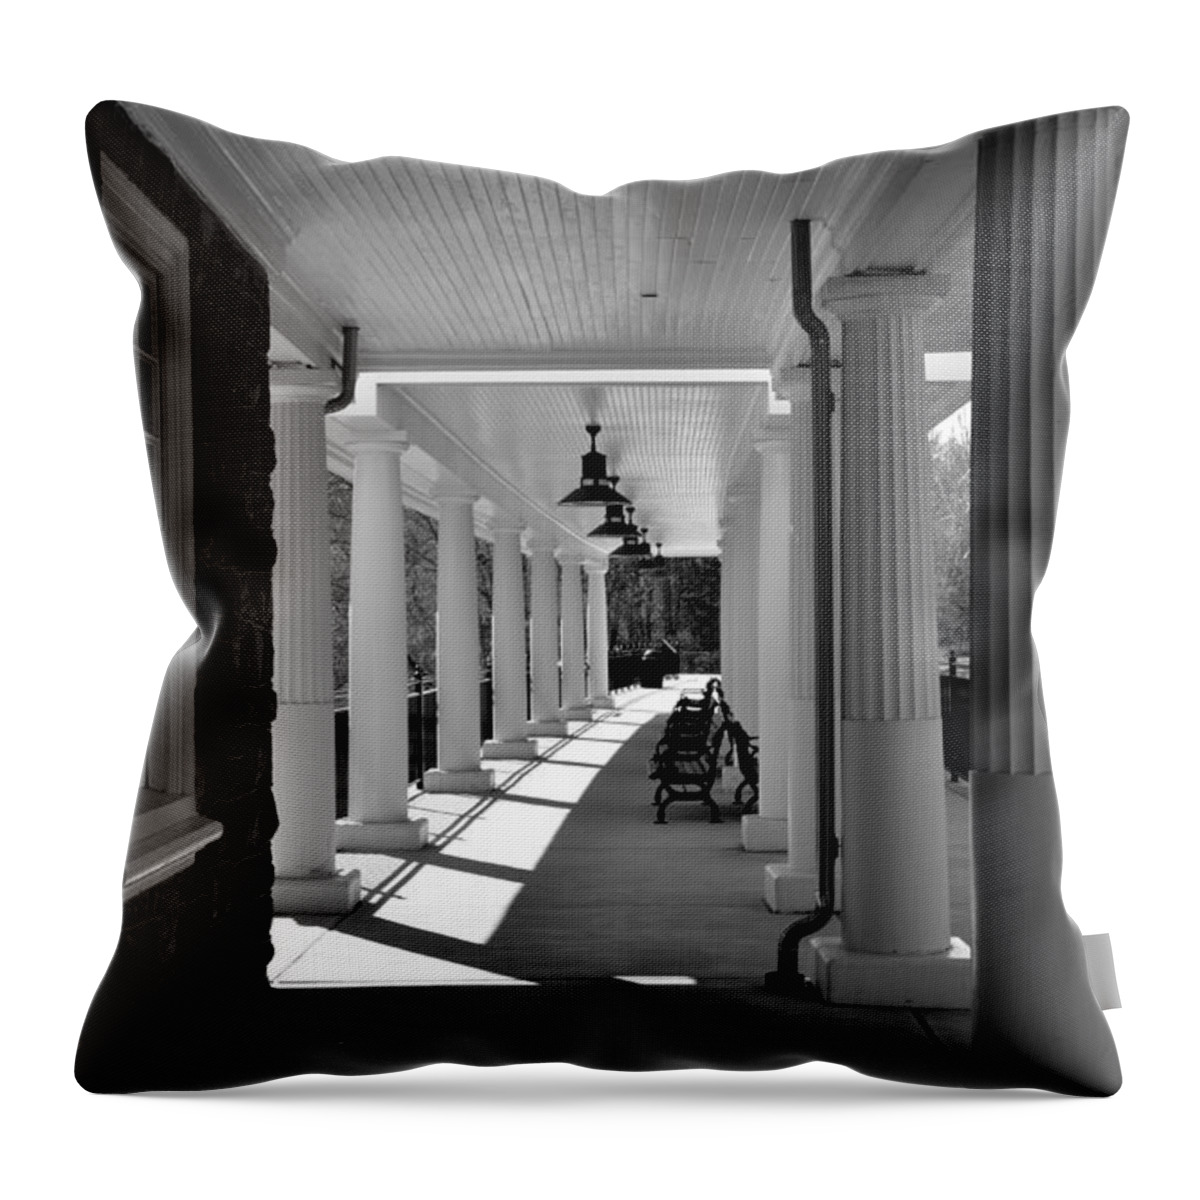 Trains Throw Pillow featuring the photograph Lonely Train Station at Valley Forge by Kathi Isserman